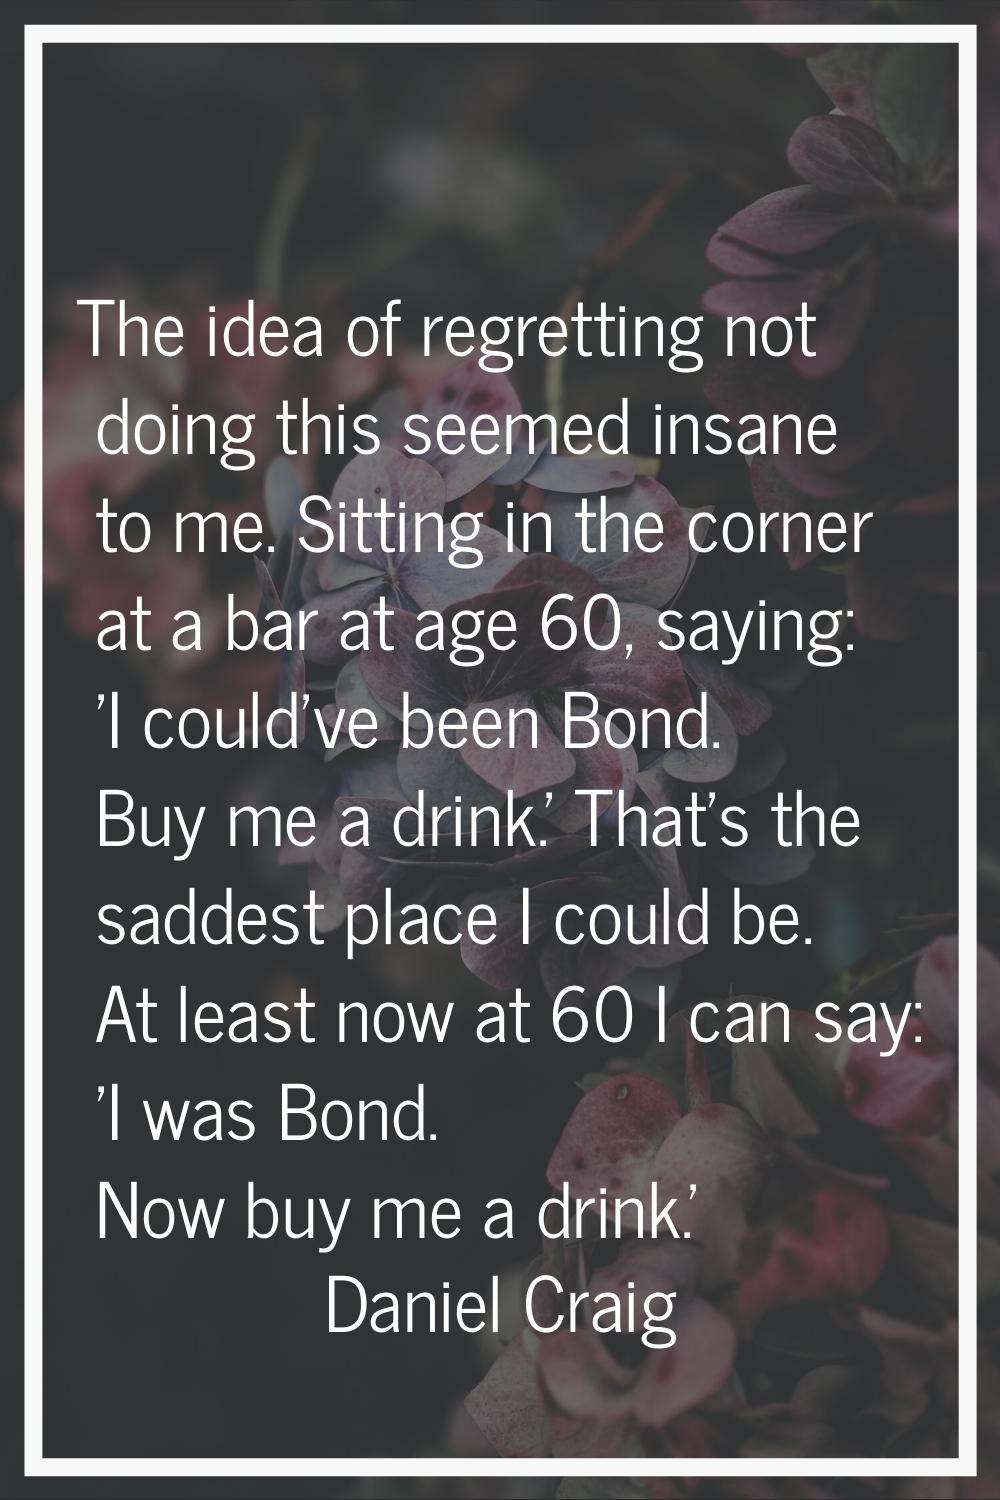 The idea of regretting not doing this seemed insane to me. Sitting in the corner at a bar at age 60